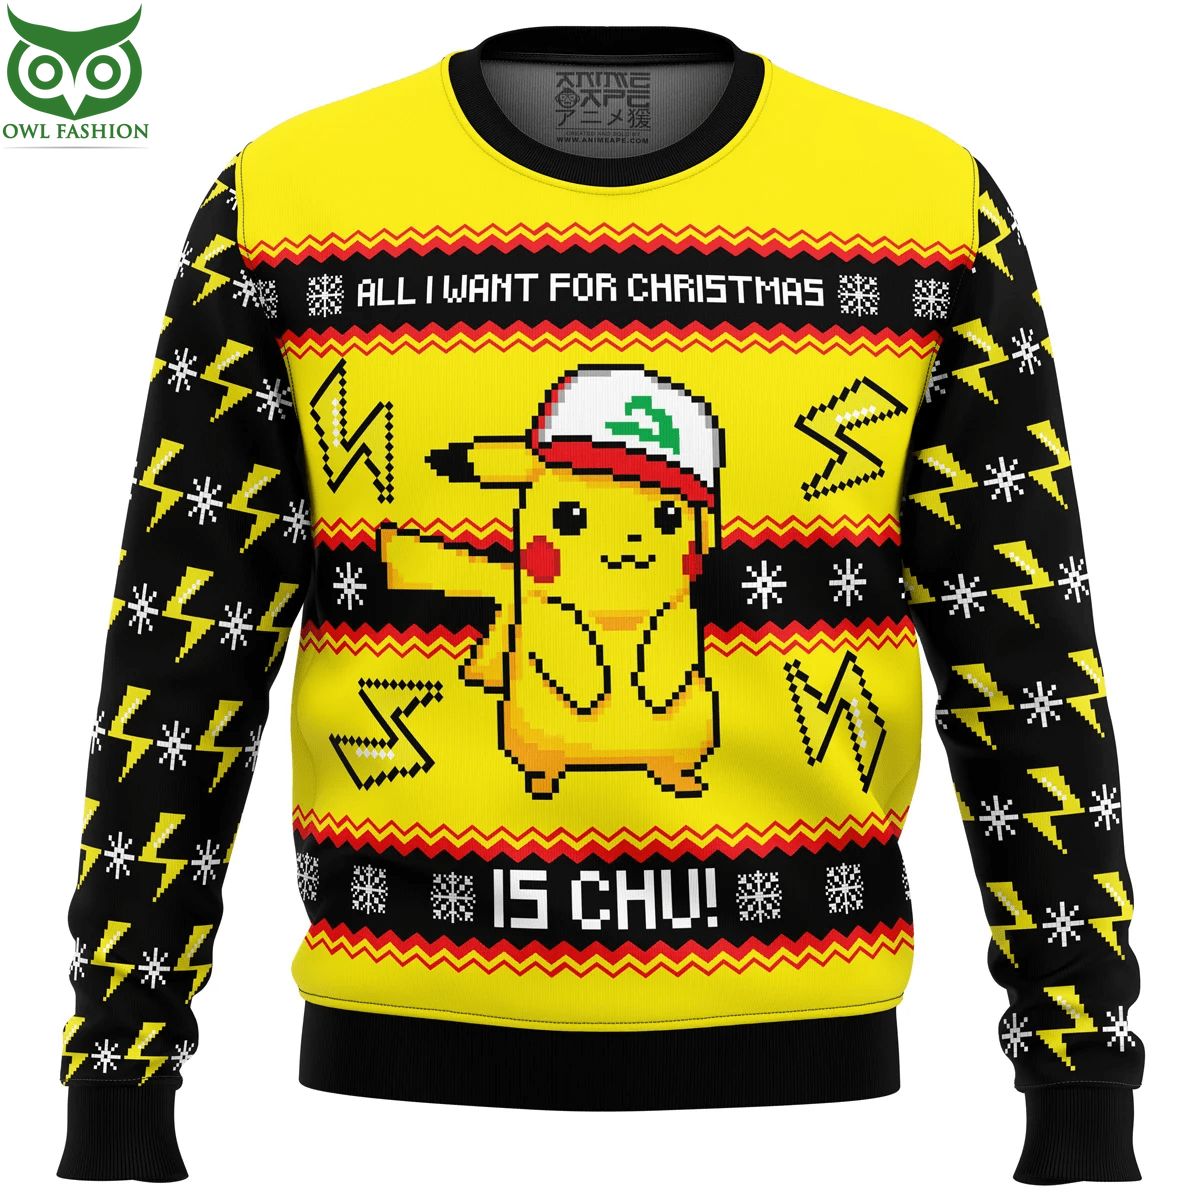 Trending All I Want For Christmas Is CHU! Ugly Christmas Sweater